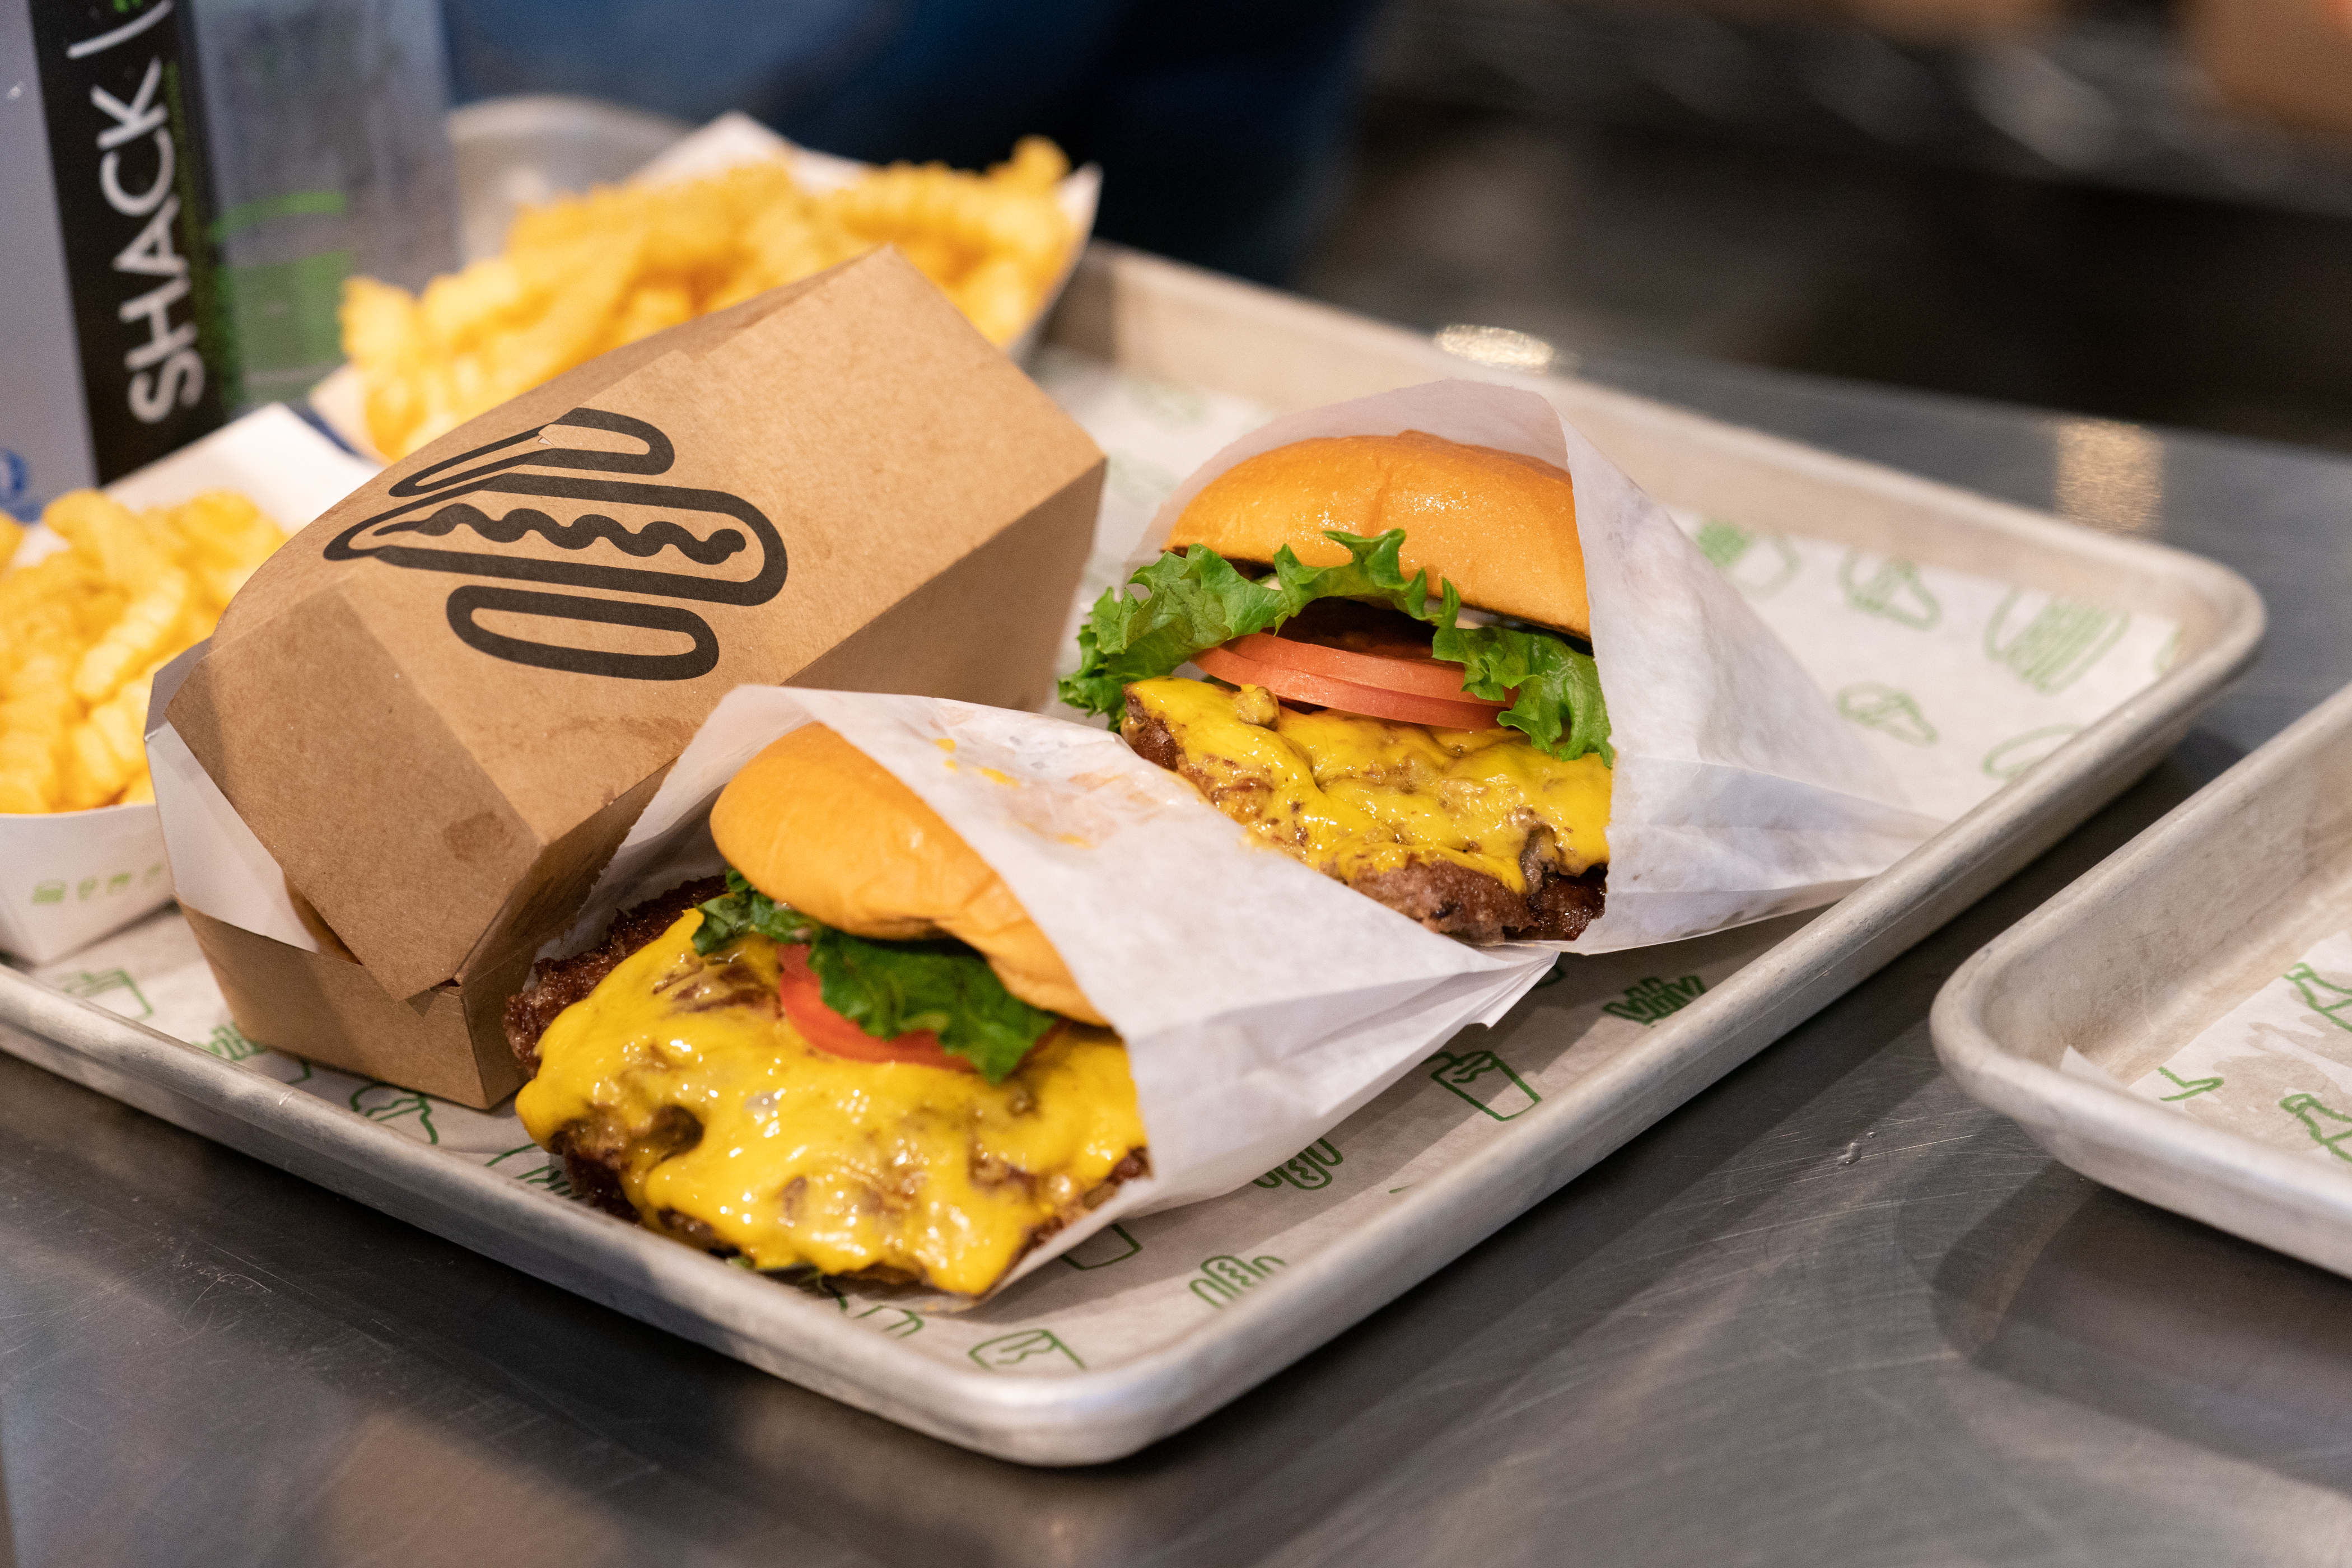 The popular food chain will be offering commuters burgers and curly fries